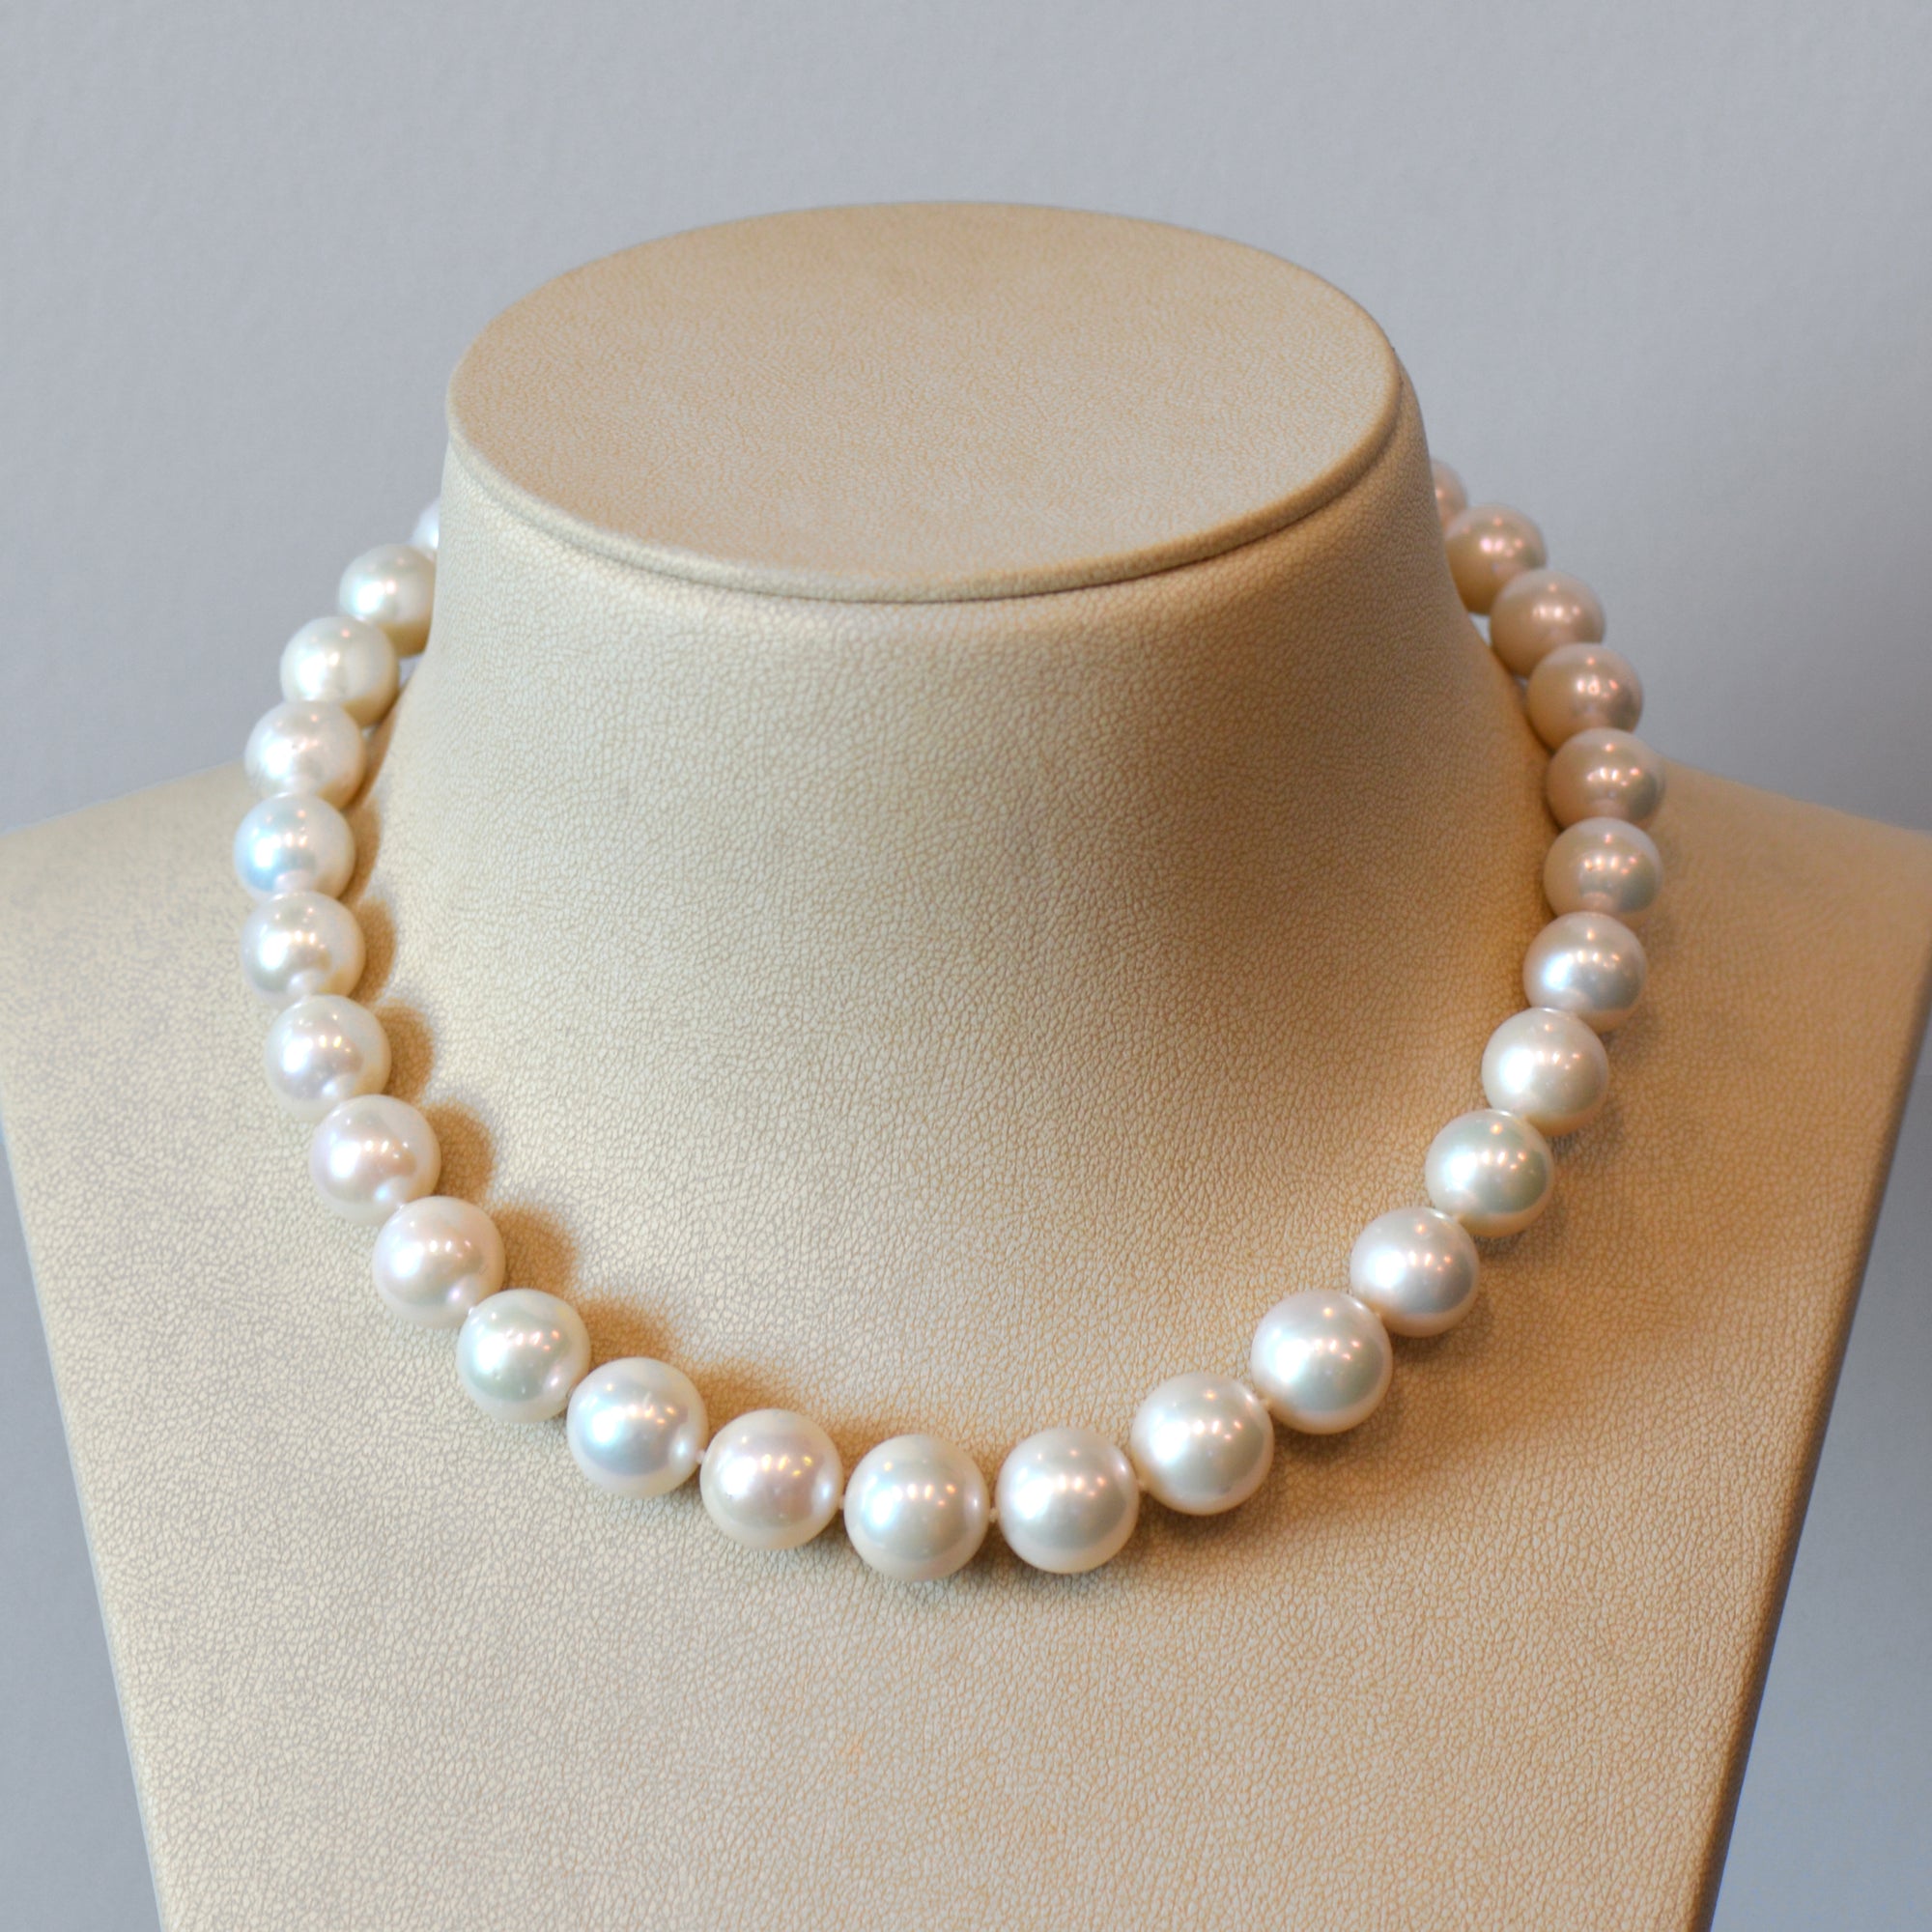 Freshwater Pearl Necklace With Sterling Silver Clasp